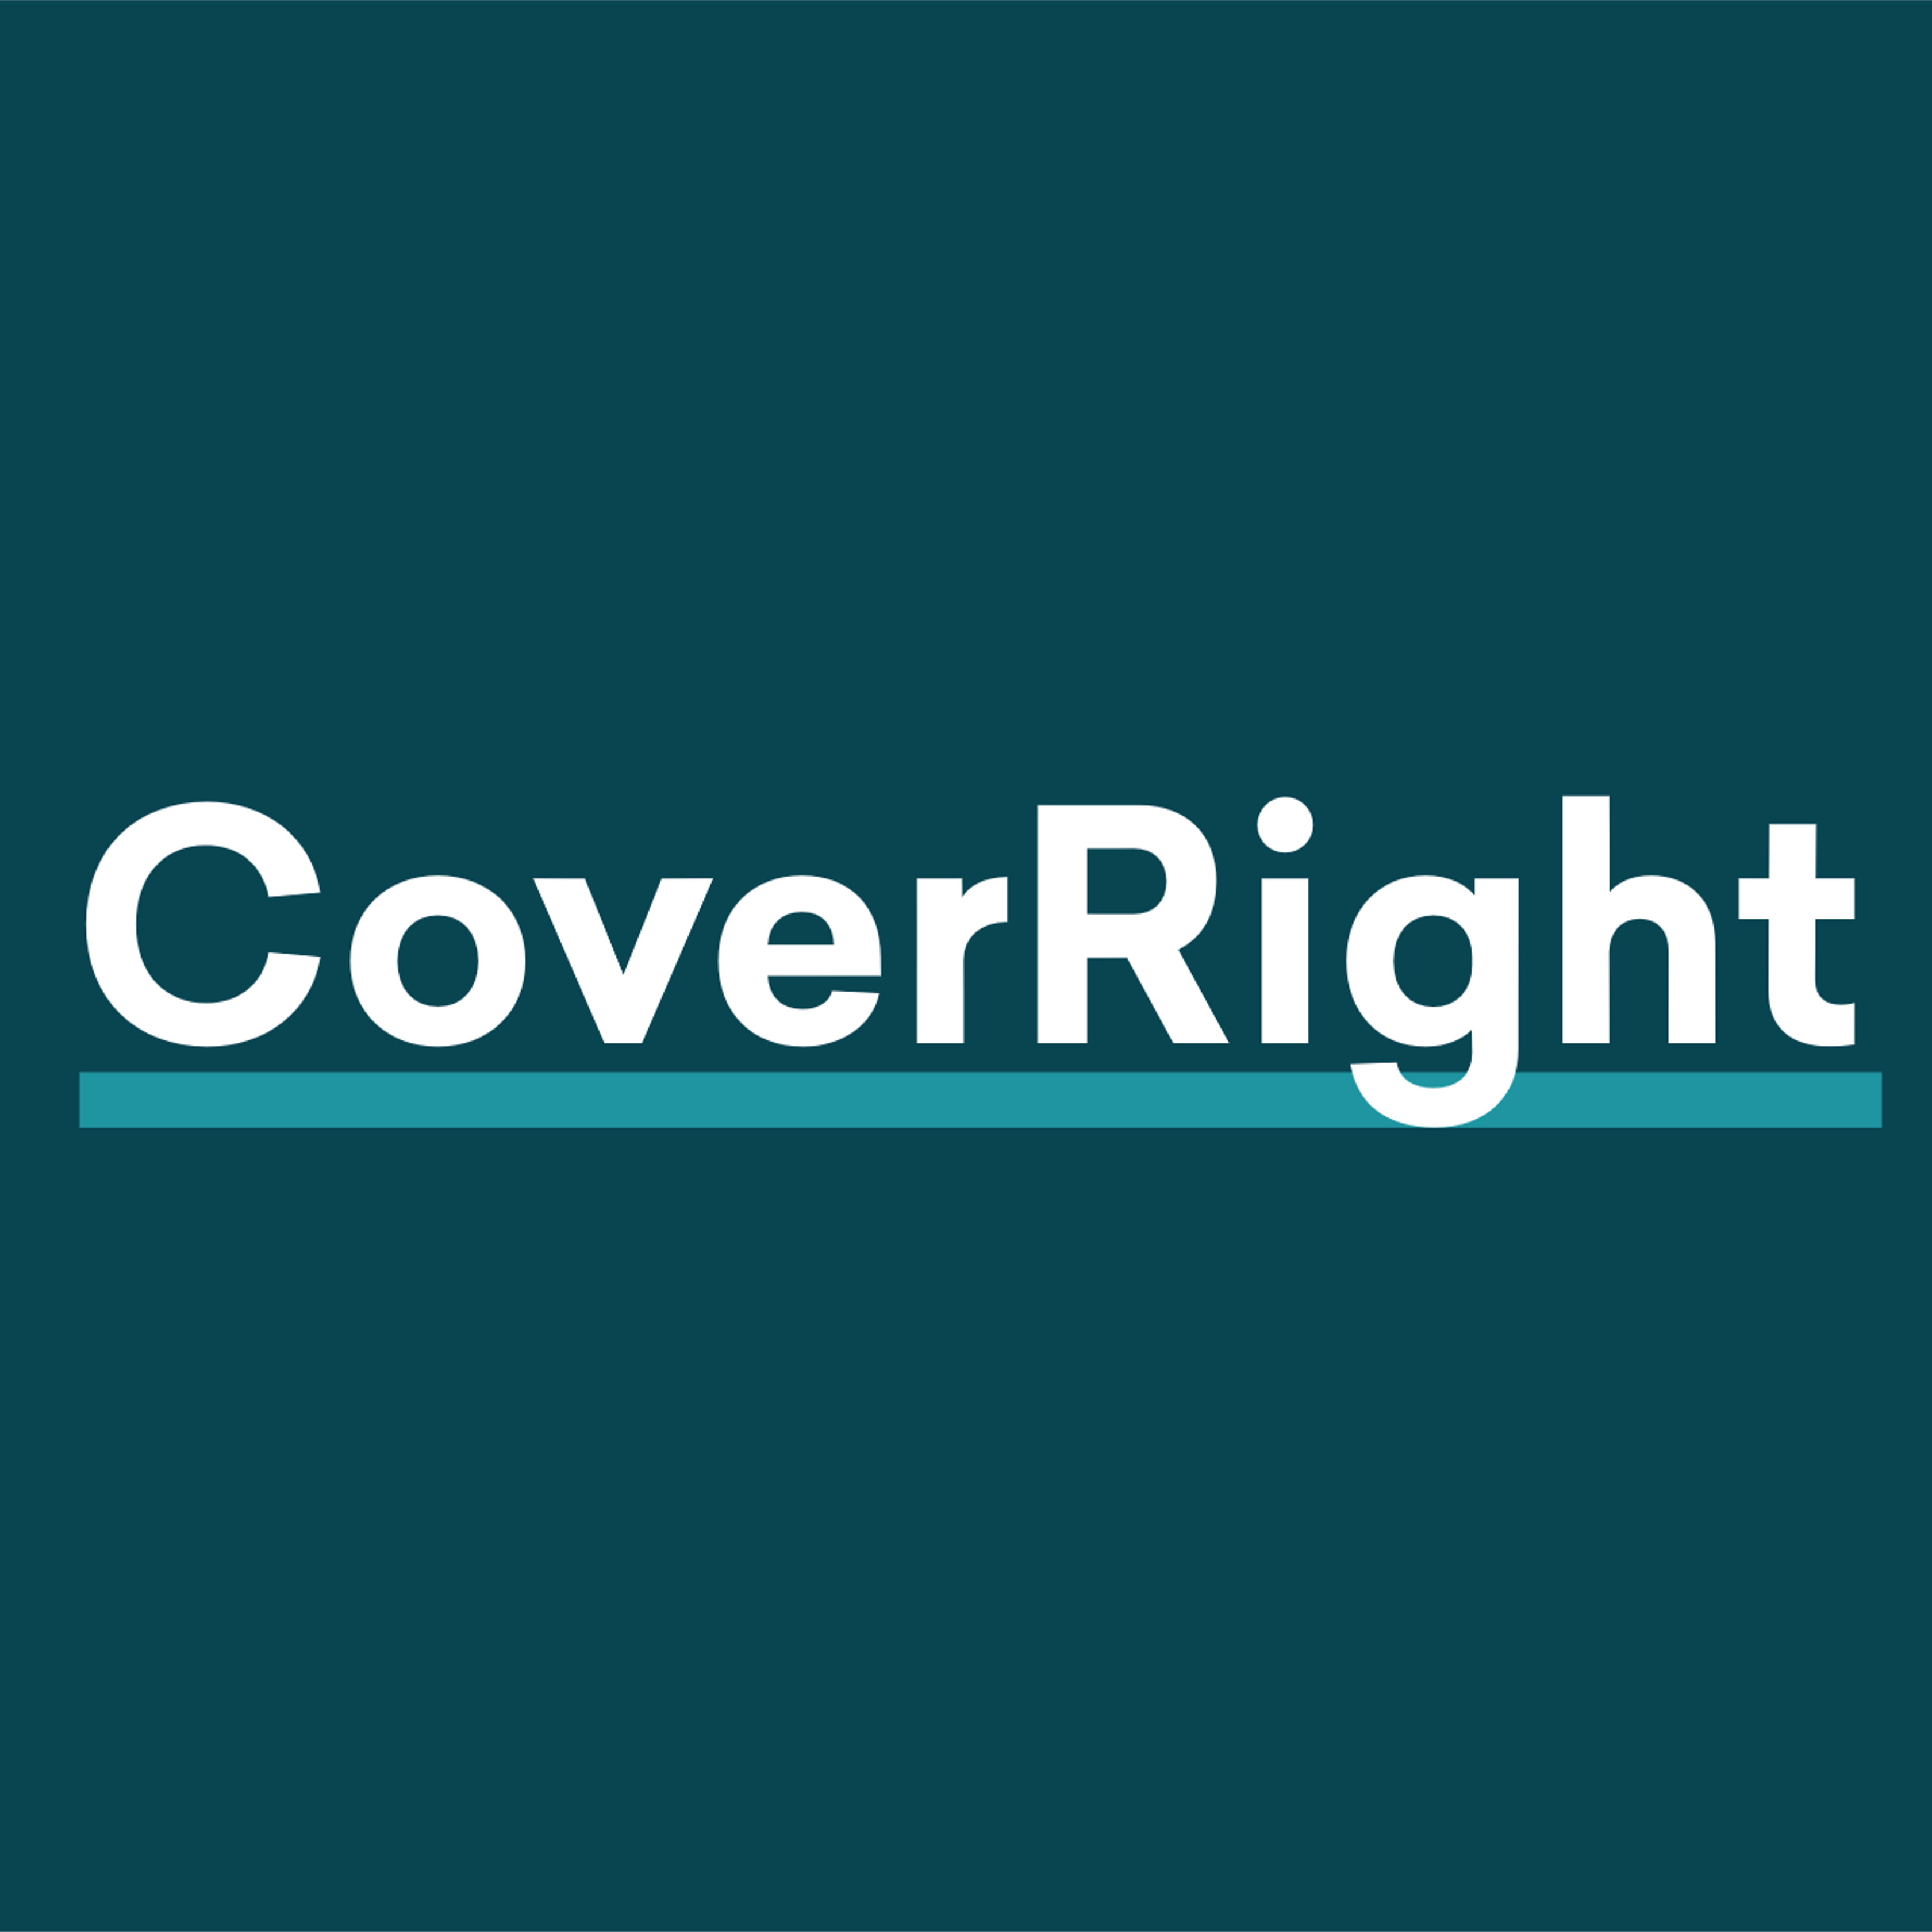 CoverRight Collaborates With Mark Cuban Cost Plus Drug Company To Help Medicare Beneficiaries Lower Drug Costs 